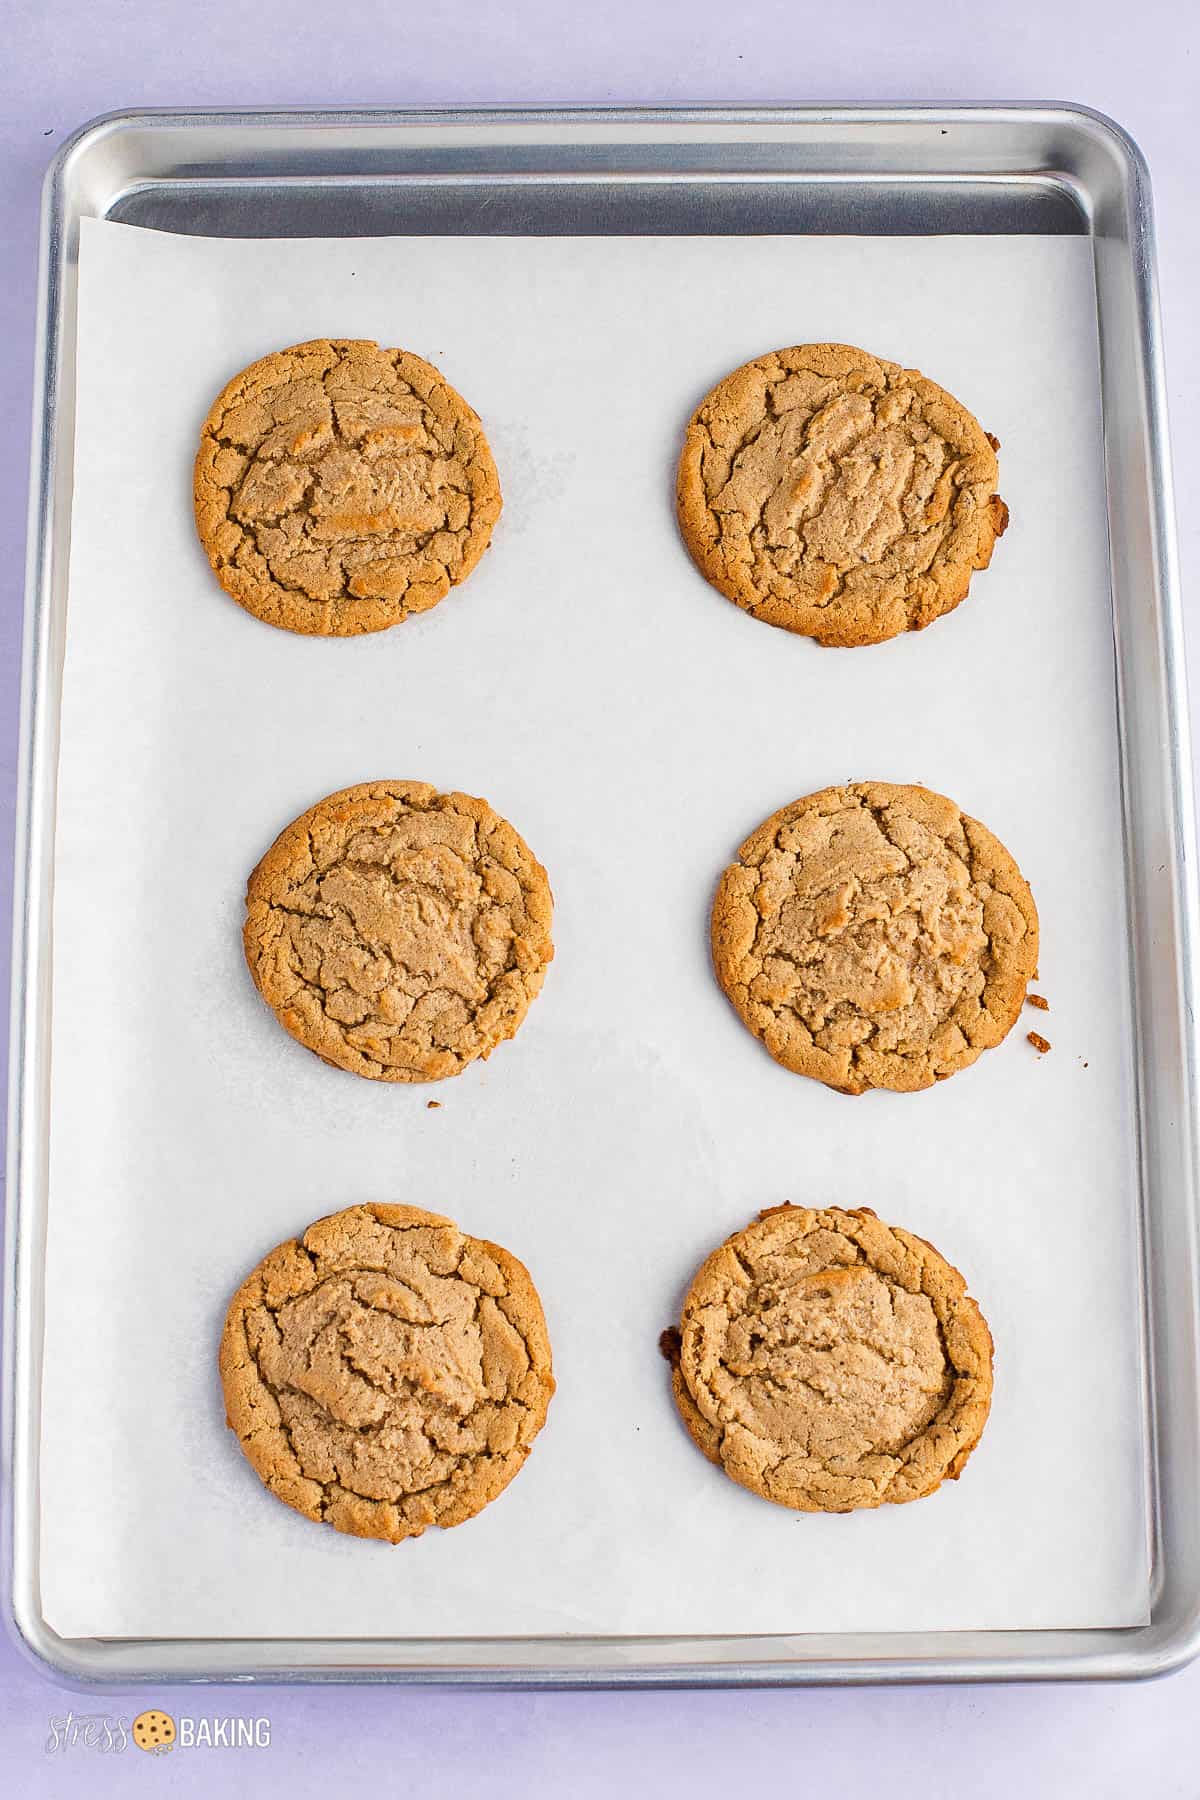 Crinkly peanut butter cookies on a baking sheet